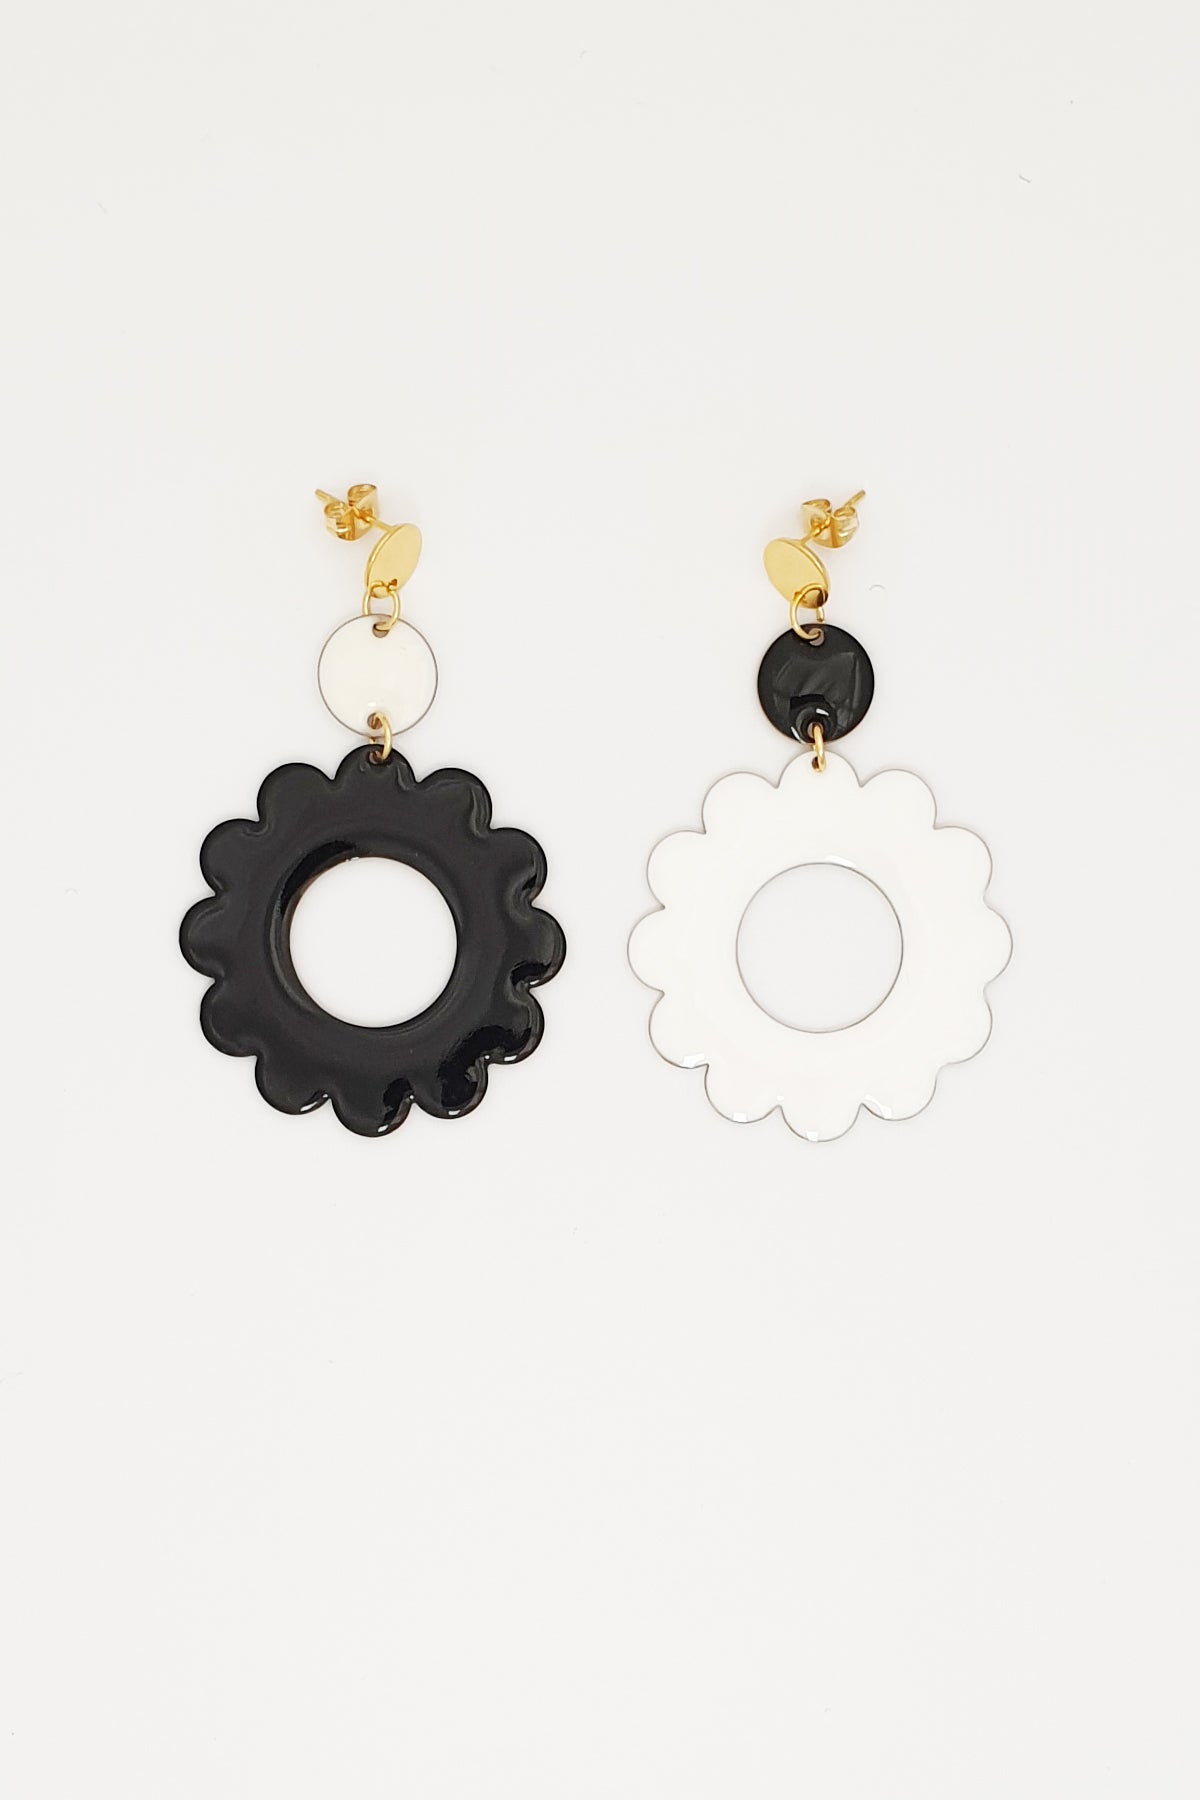 A pair of stud dangle earrings lay on white background. The left earring features a white enamel dot connected to a larger black enamel flower. The right earring is flipped and features an enamel black dot connected to a larger white enamel flower 